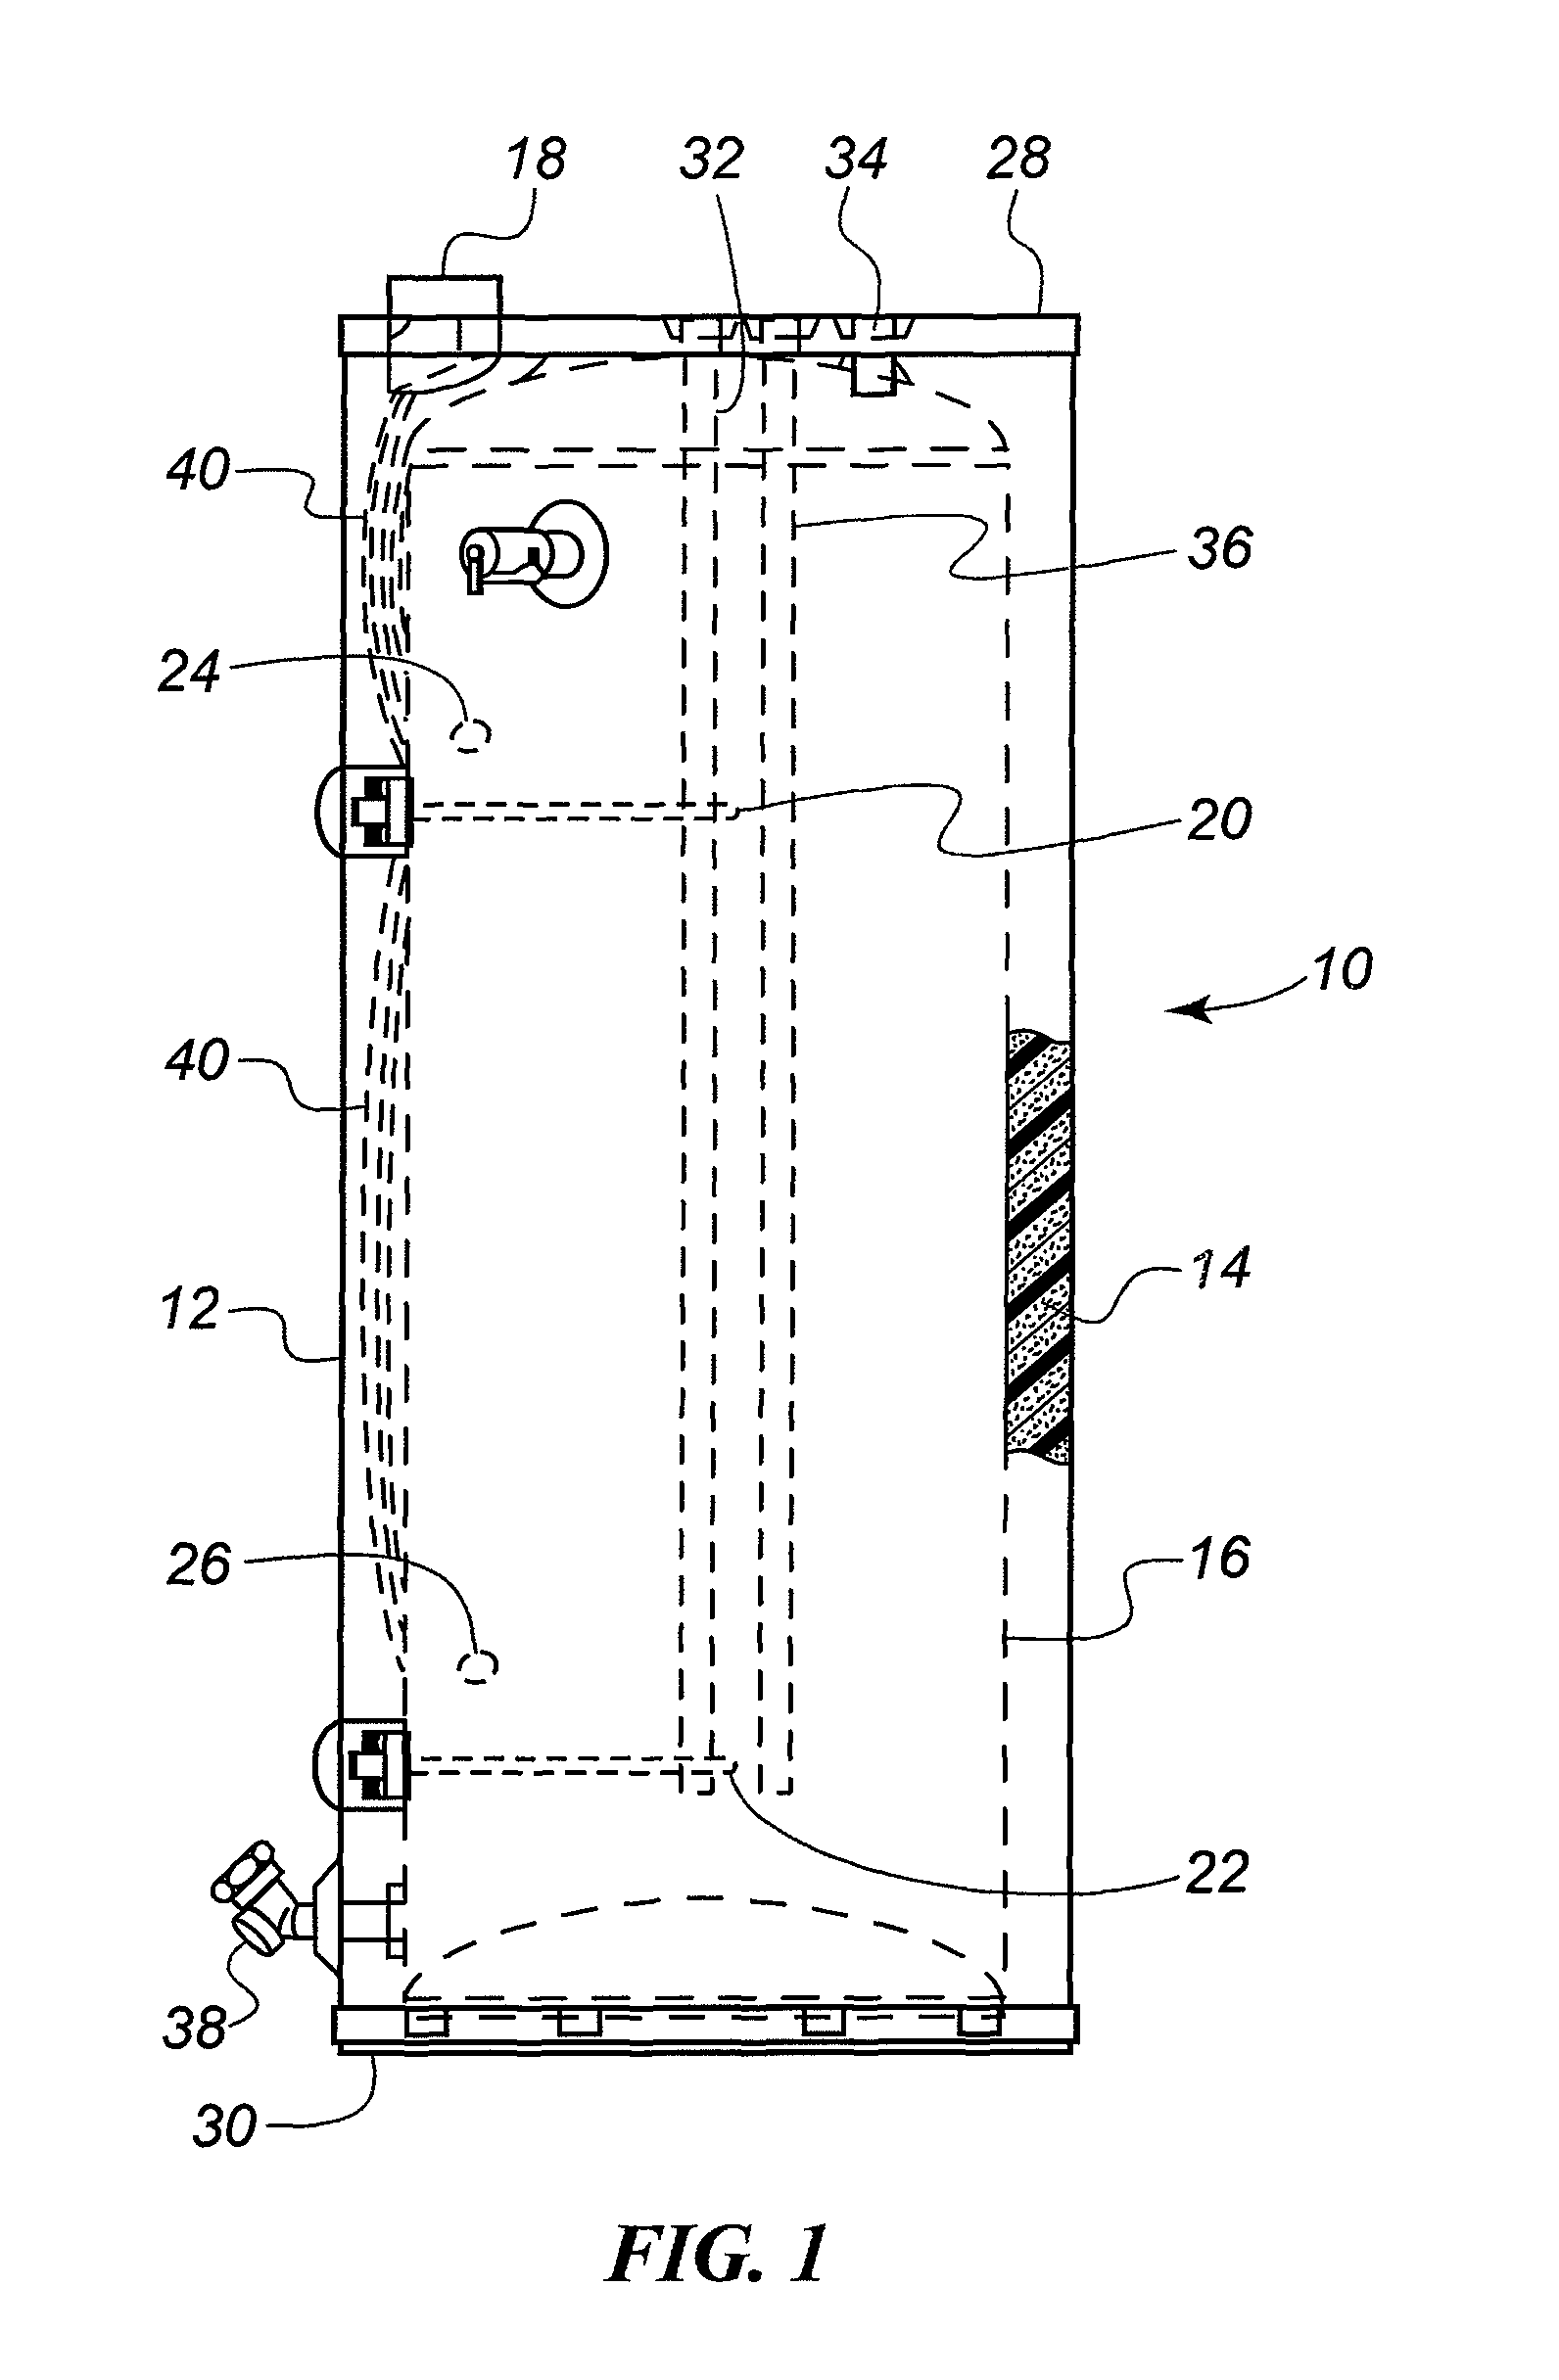 Methods for preventing a dry fire condition and a water heater incorporating same